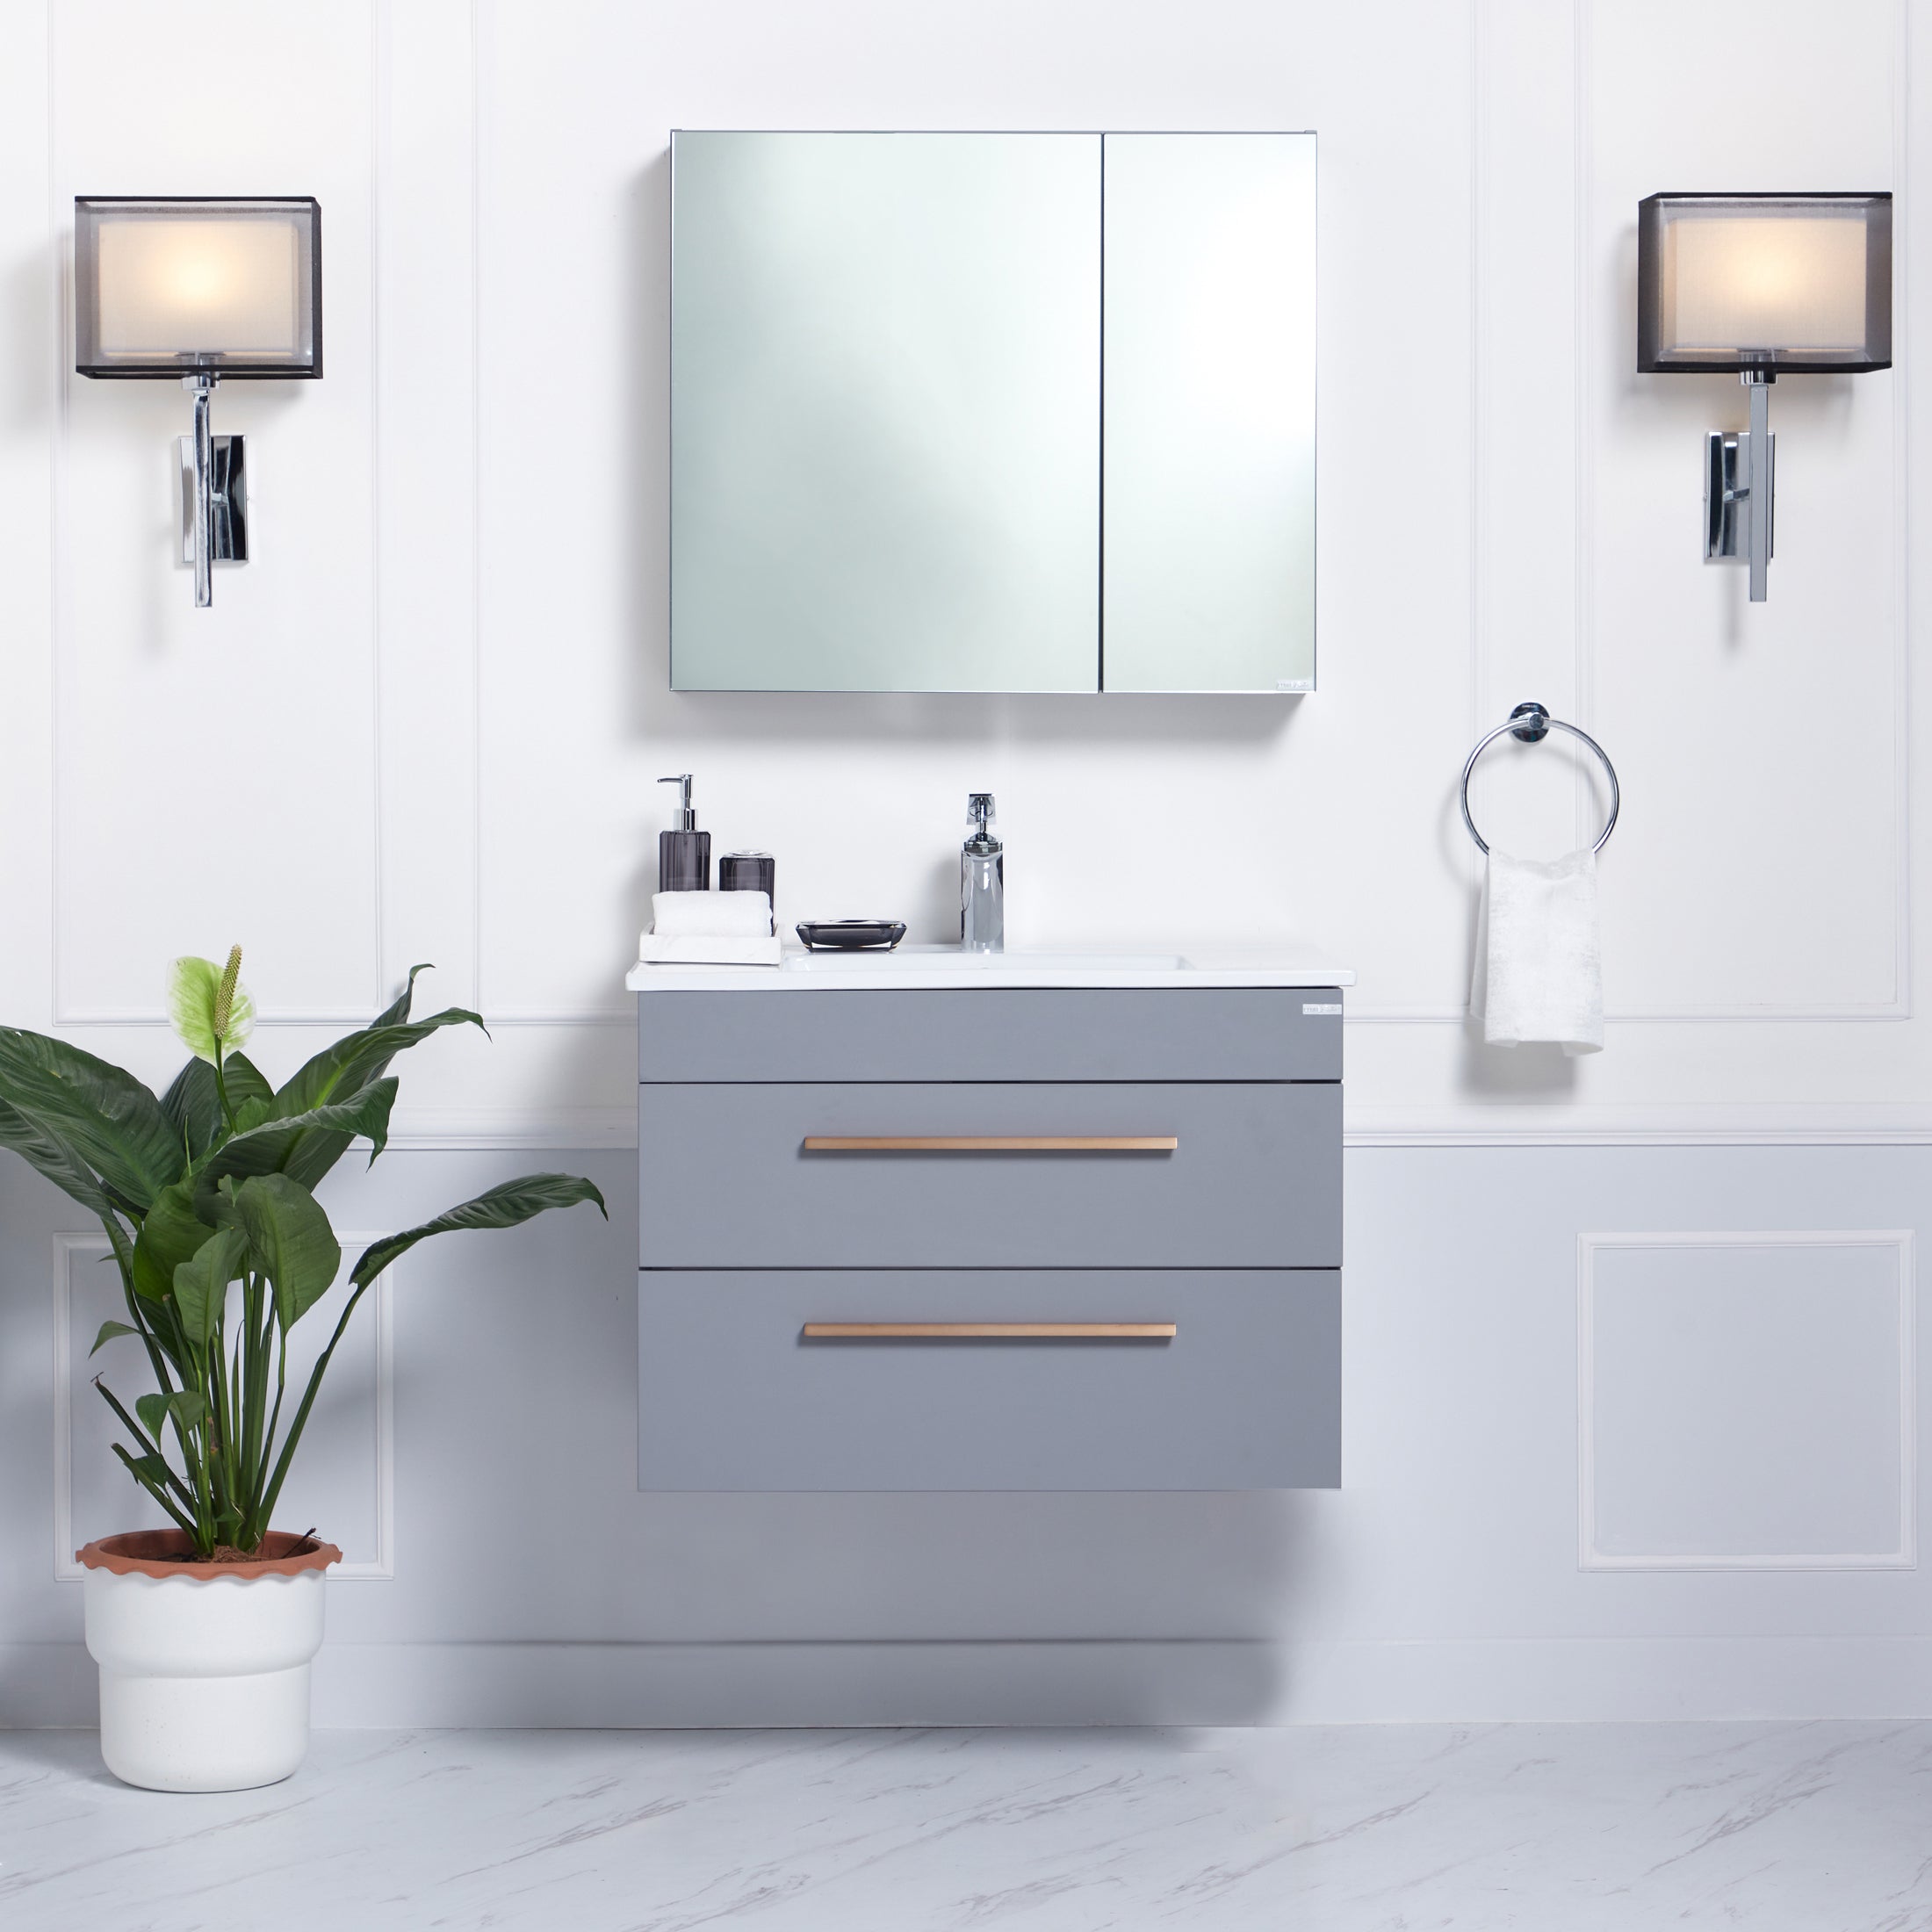 Rhea Bathroom Vanity Set, front-facing with bathroom décor & toiletries on counter and in cabinets